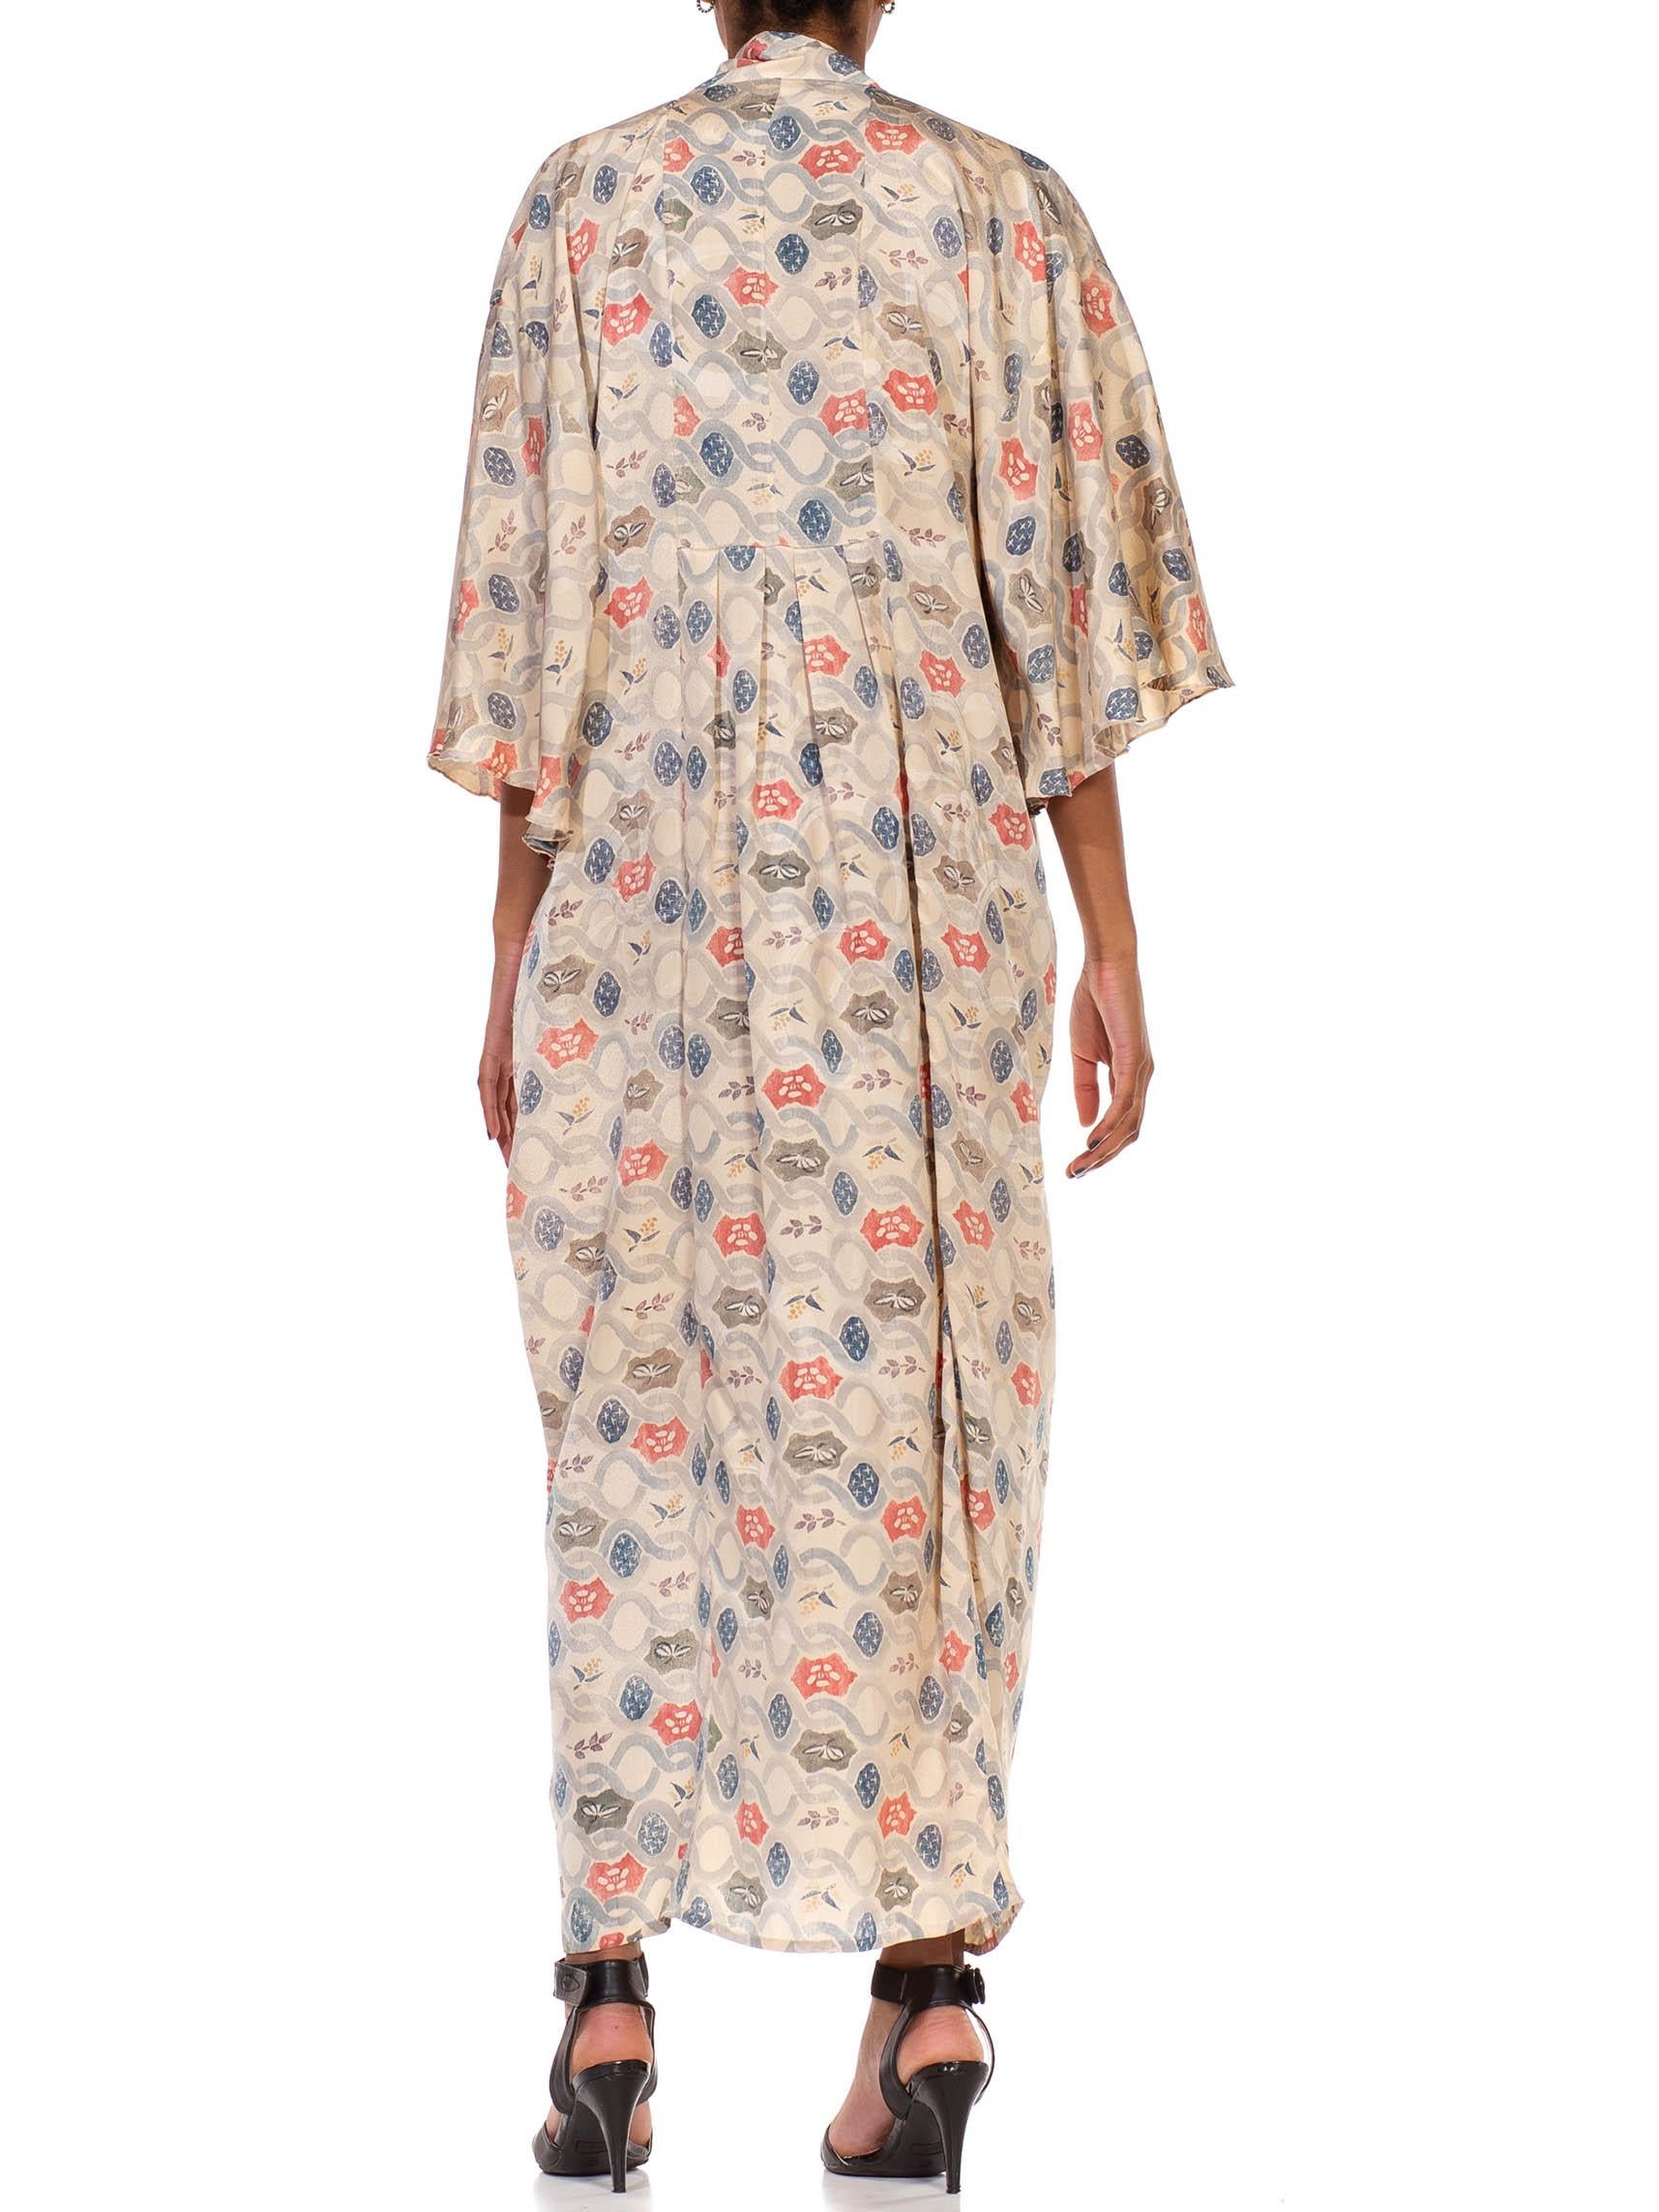 MORPHEW COLLECTION Cream & Light Blue Silk Hand Block Printed Kaftan Made From  For Sale 2